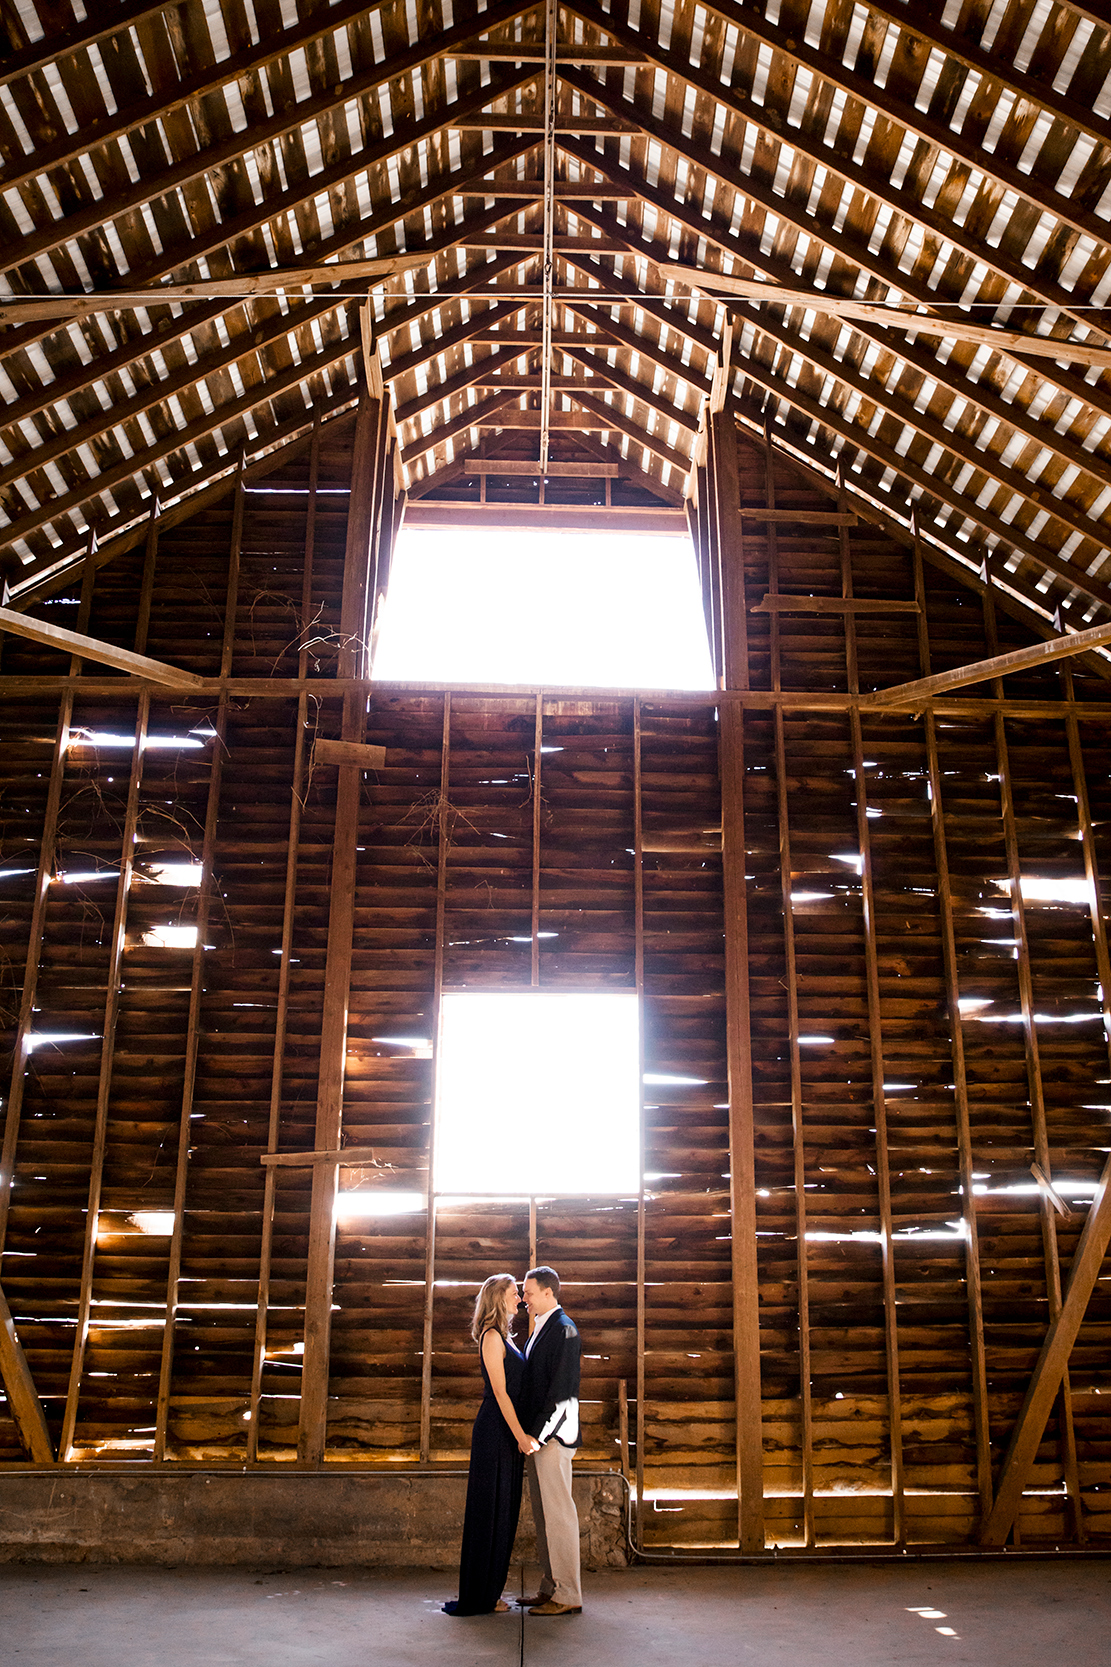 Rebecca  Emanuels Engagement Shoot at Panorama Event Barn - Image Property of www.j-dphoto.com